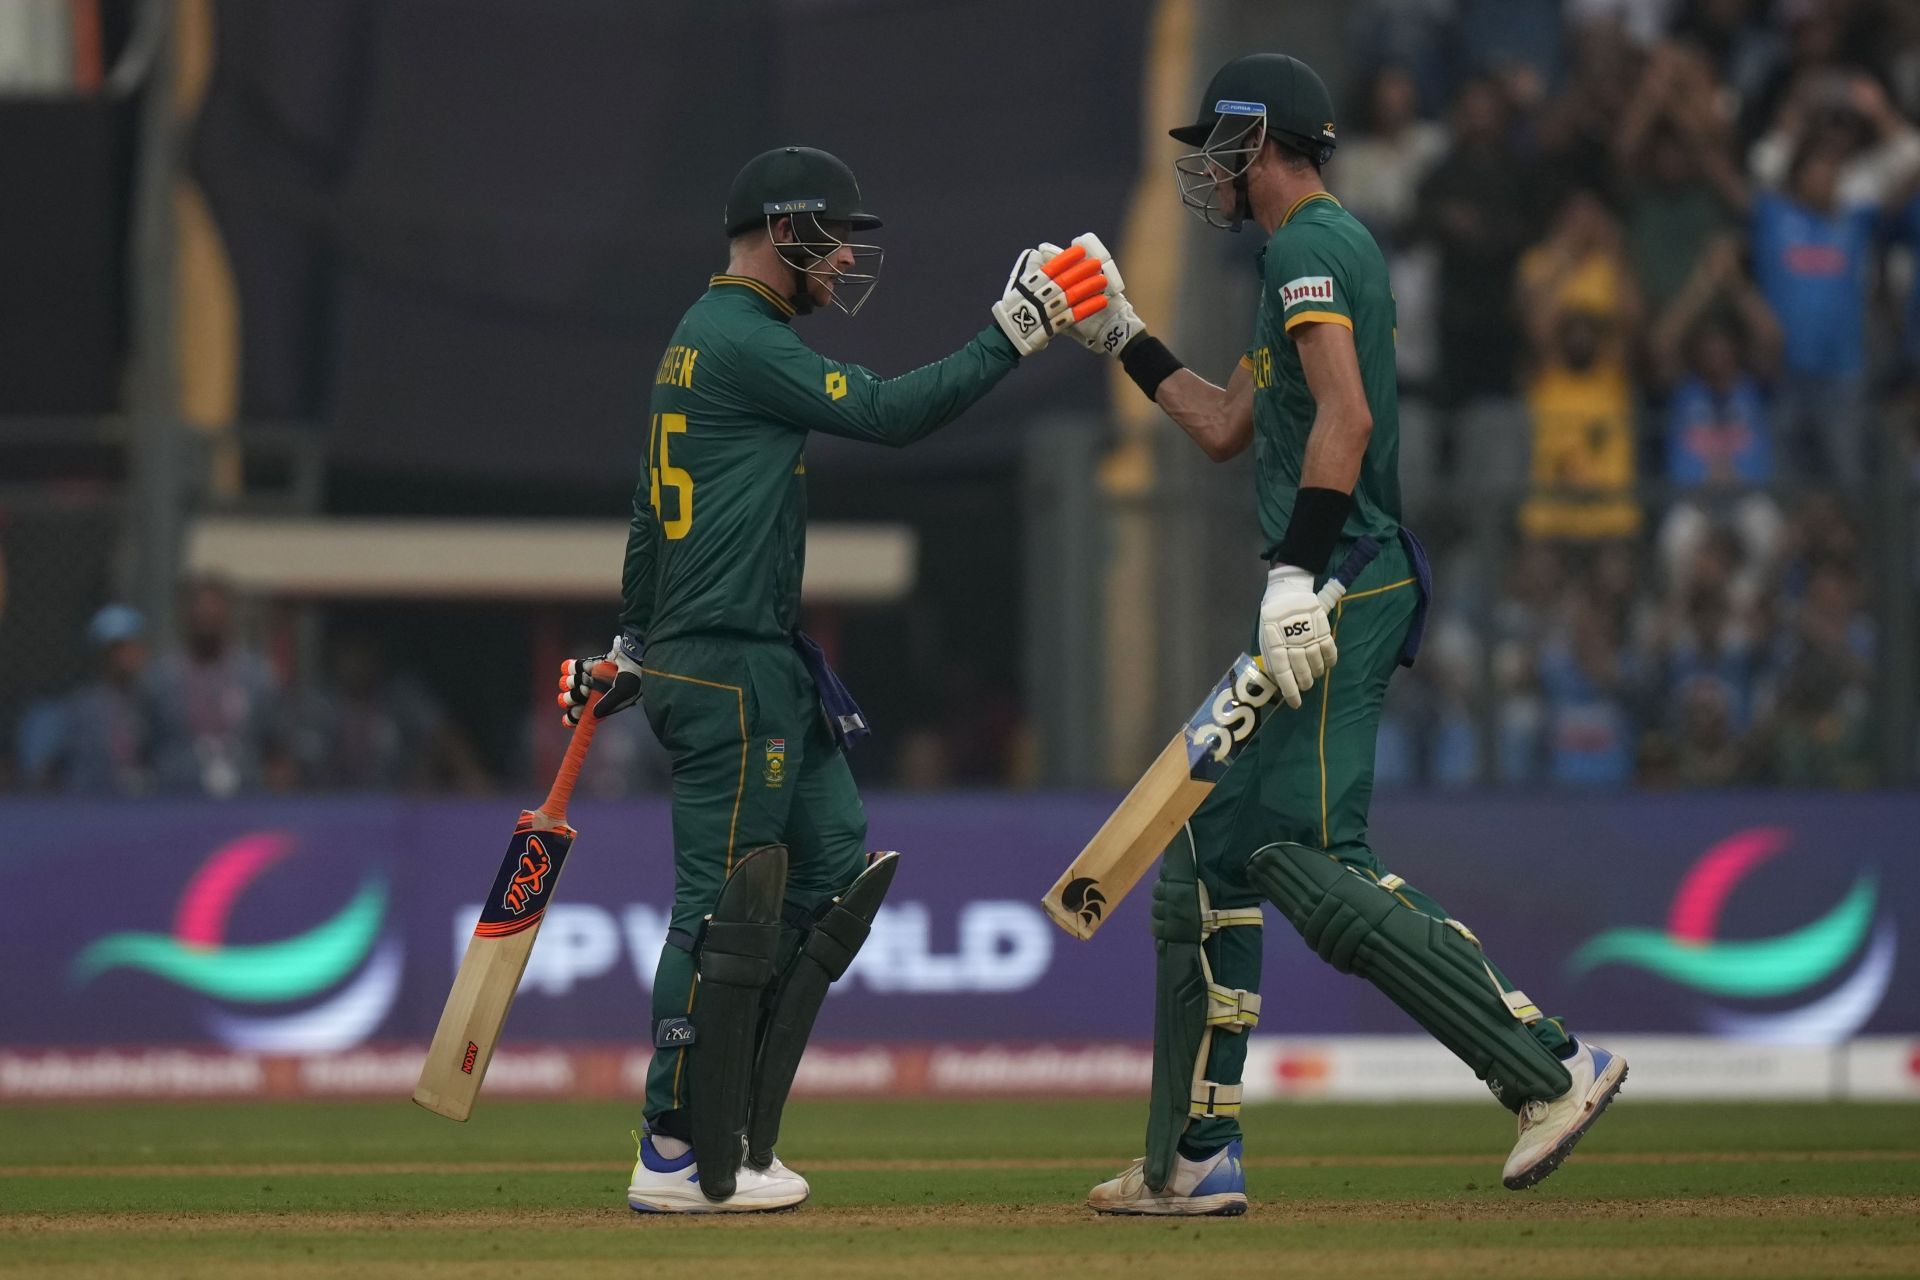 Heinrich Klaasen and Marco Jansen&#039;s partnership took South Africa to a mammoth total. [P/C: AP]